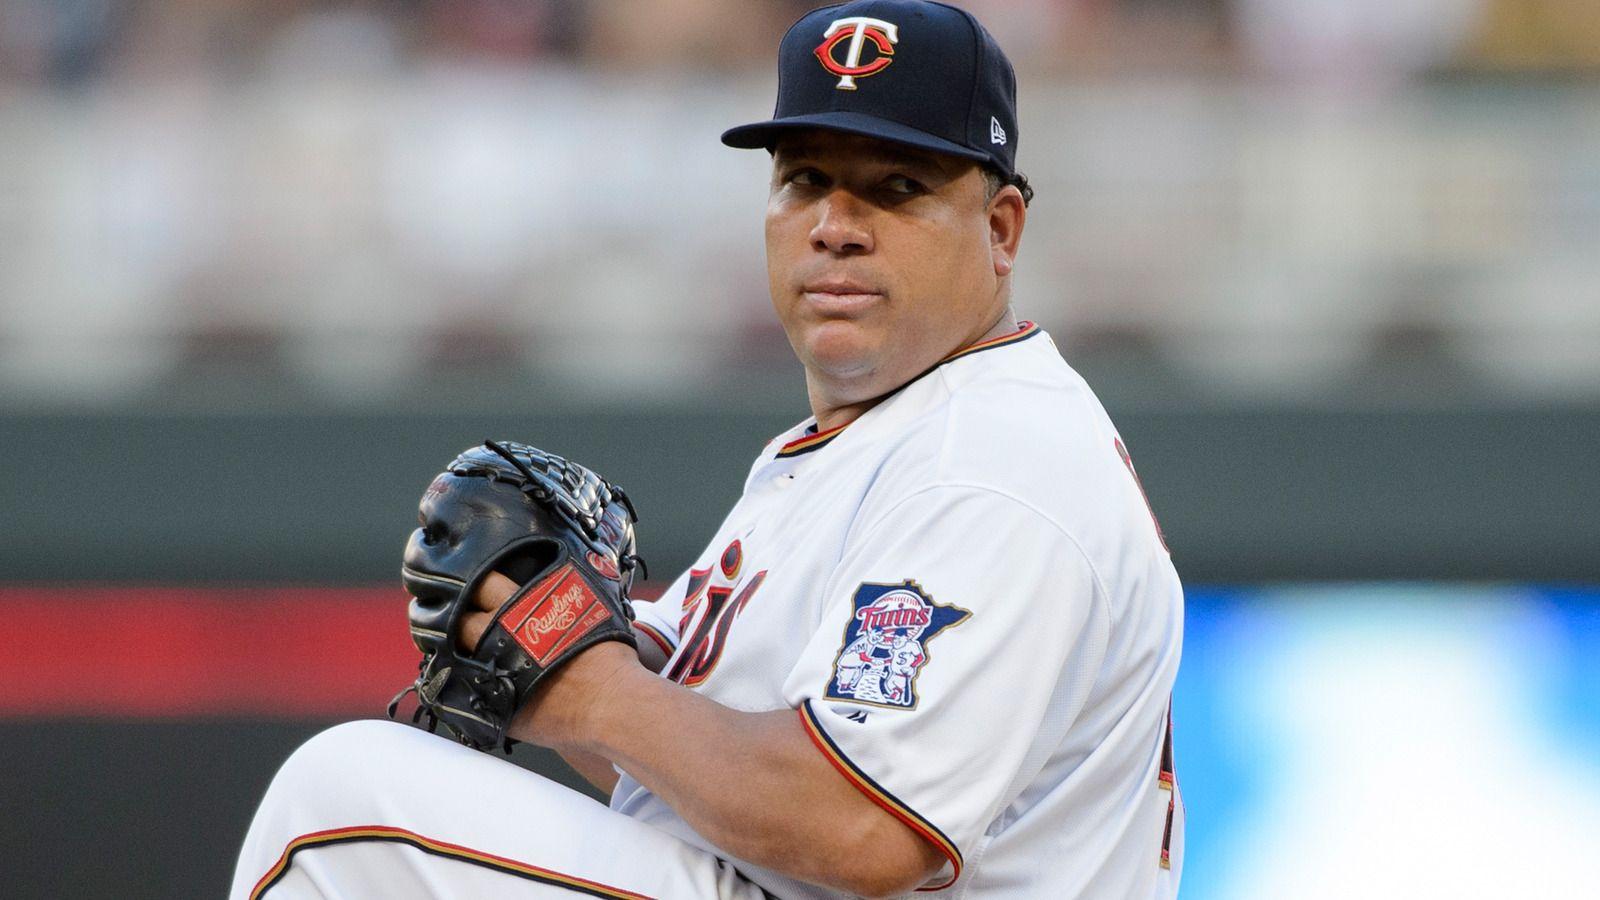 Bartolo Colon doubles down on vow to pitch until he's 45